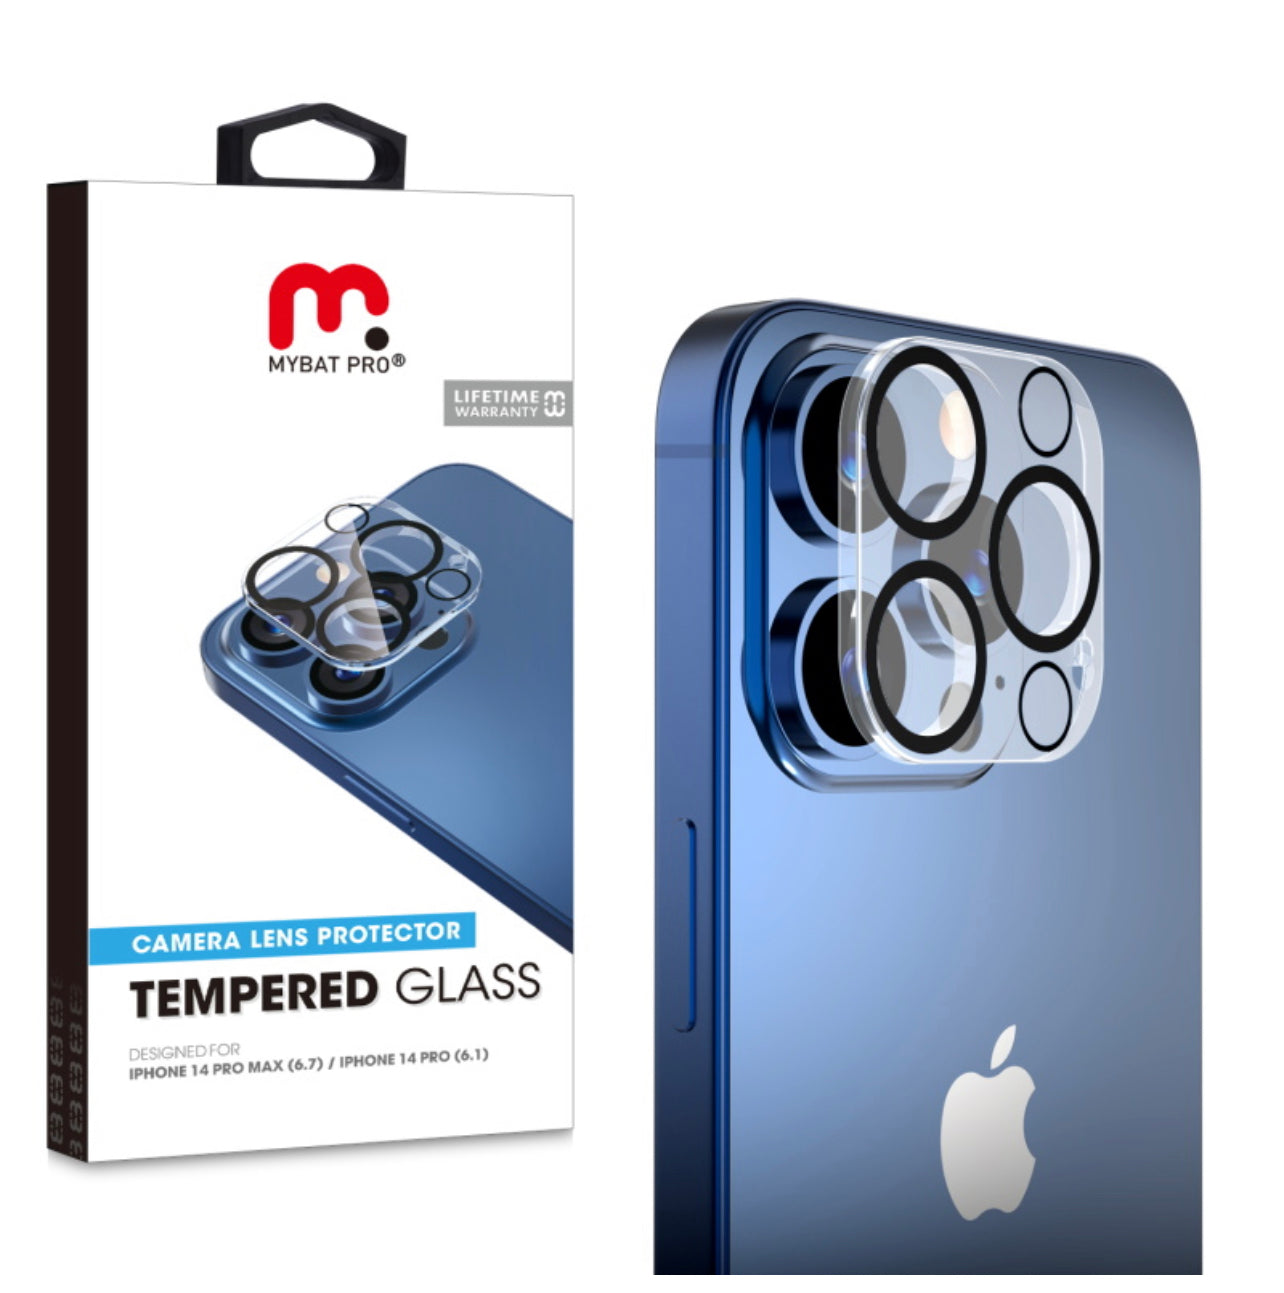 MyBat Pro Tempered Glass Lens Protector (2.5D) for Apple iPhone 14 Pro Max (6.7) / 14 Pro (6.1) - Clear